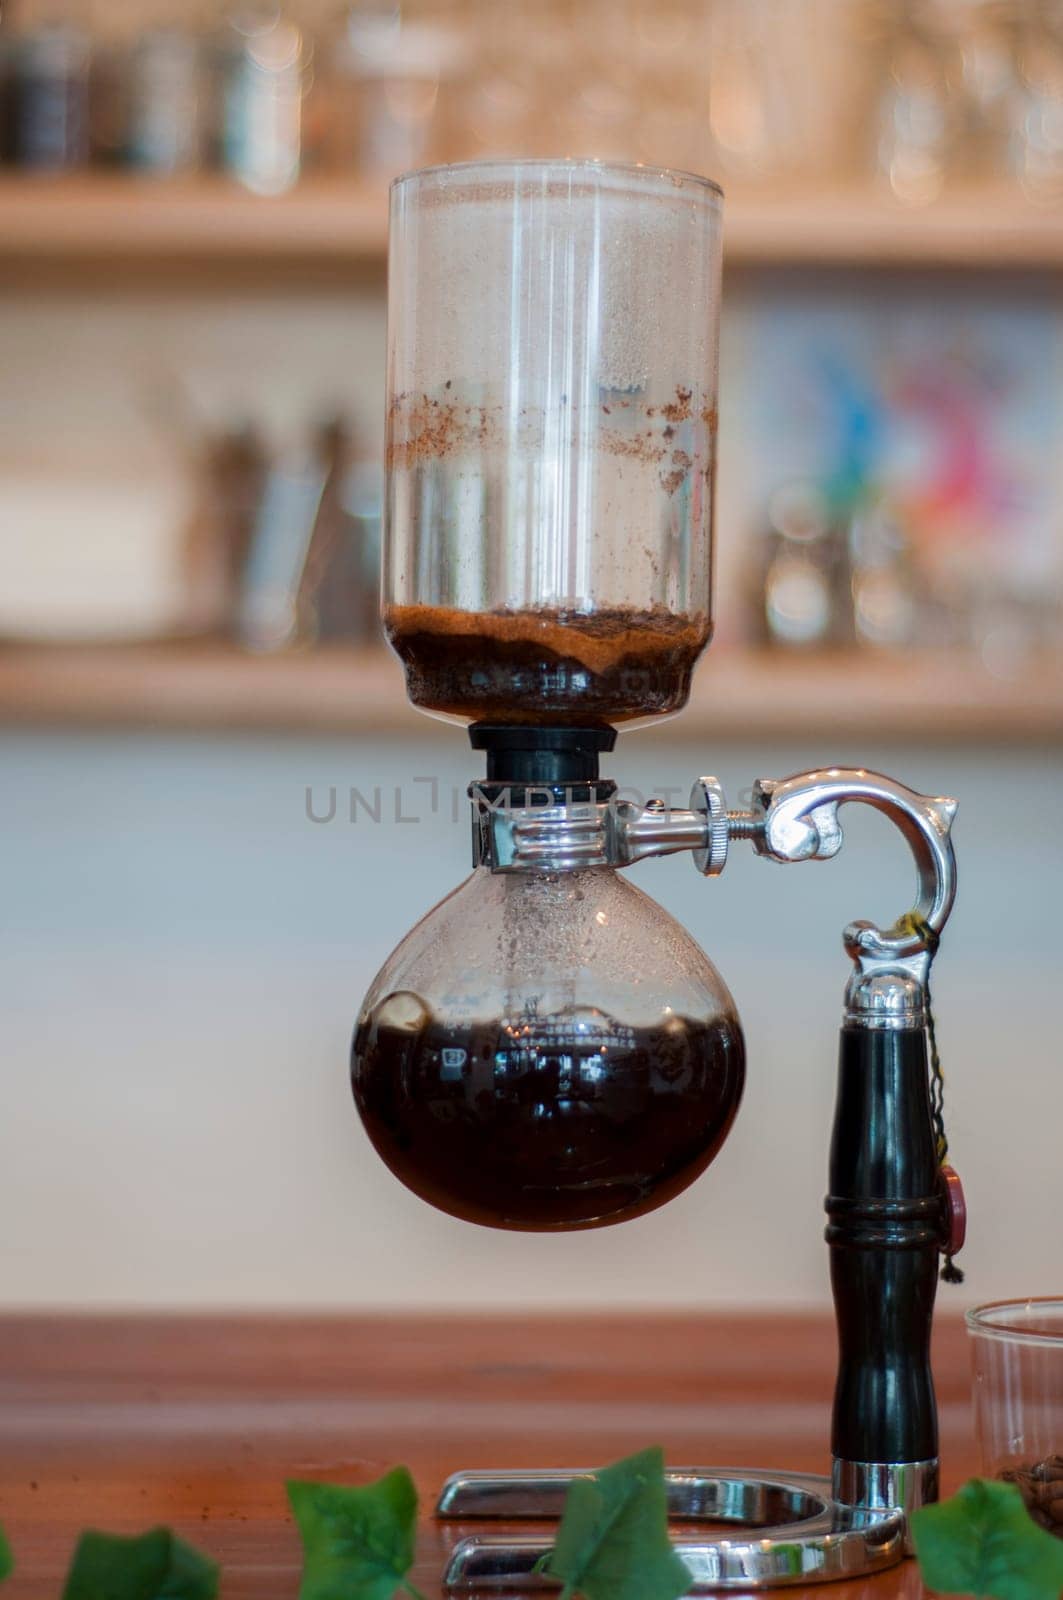 Siphon coffee maker on a bar in a cafeteria giving off hot coffee. High quality photo